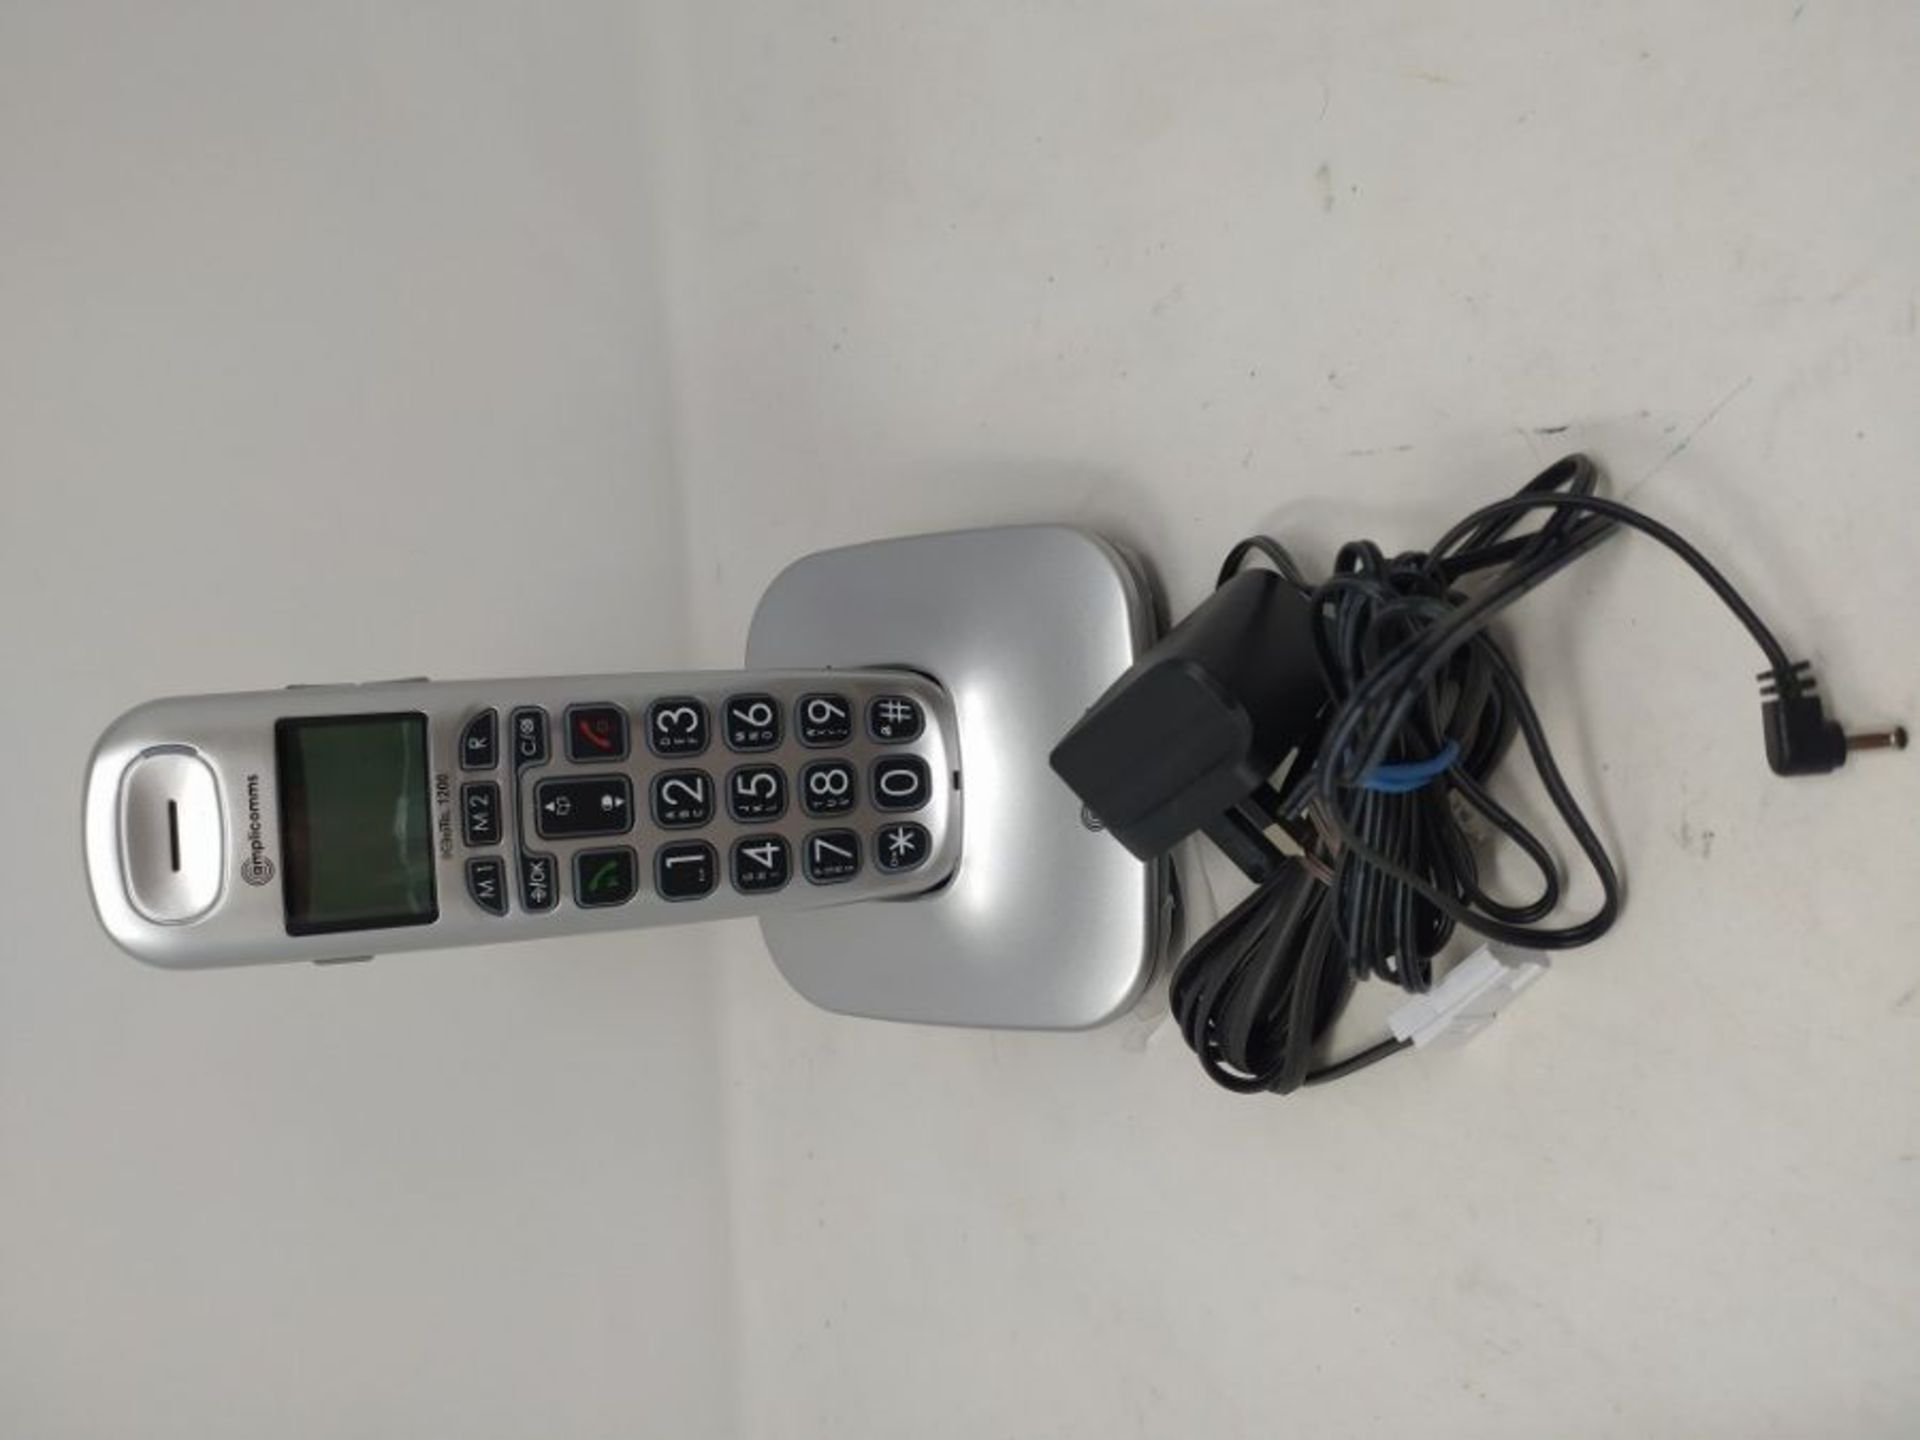 Amplicomms BigTel 1200 - Big Button Phone for Elderly - Loud Phones for Hard of Hearin - Image 2 of 2